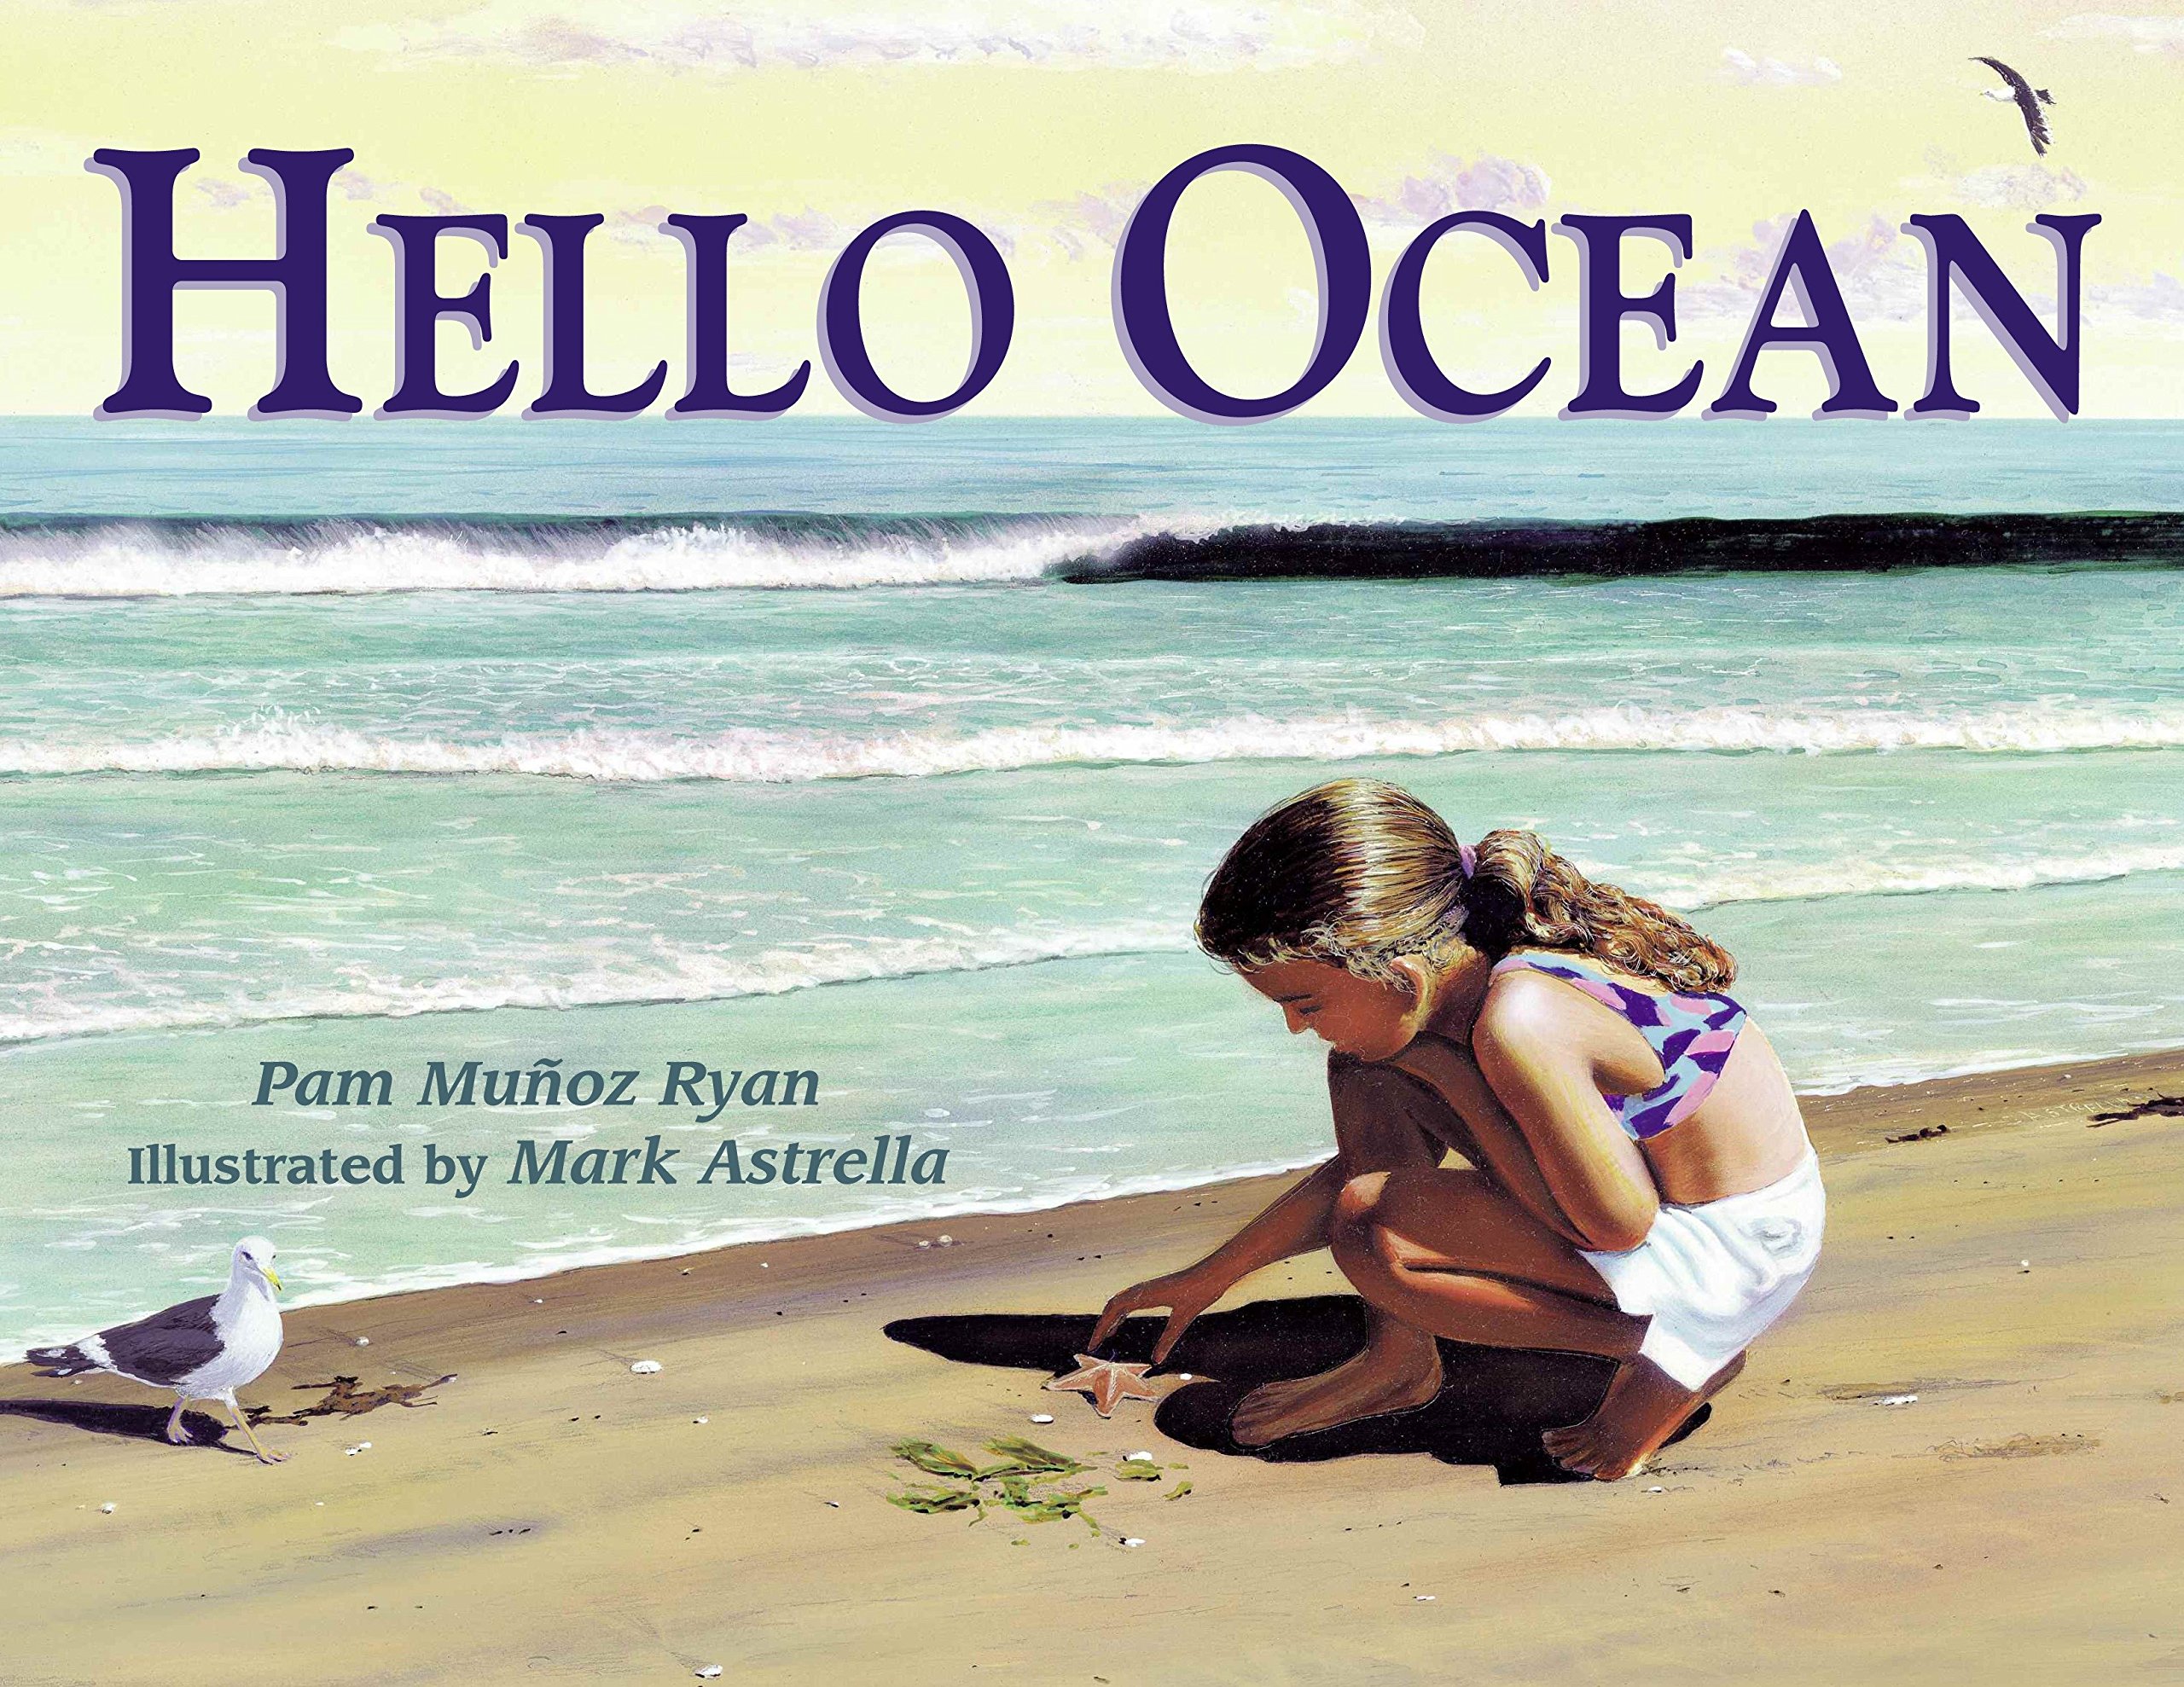 speech and language teaching concepts for Hello Ocean in speech therapy